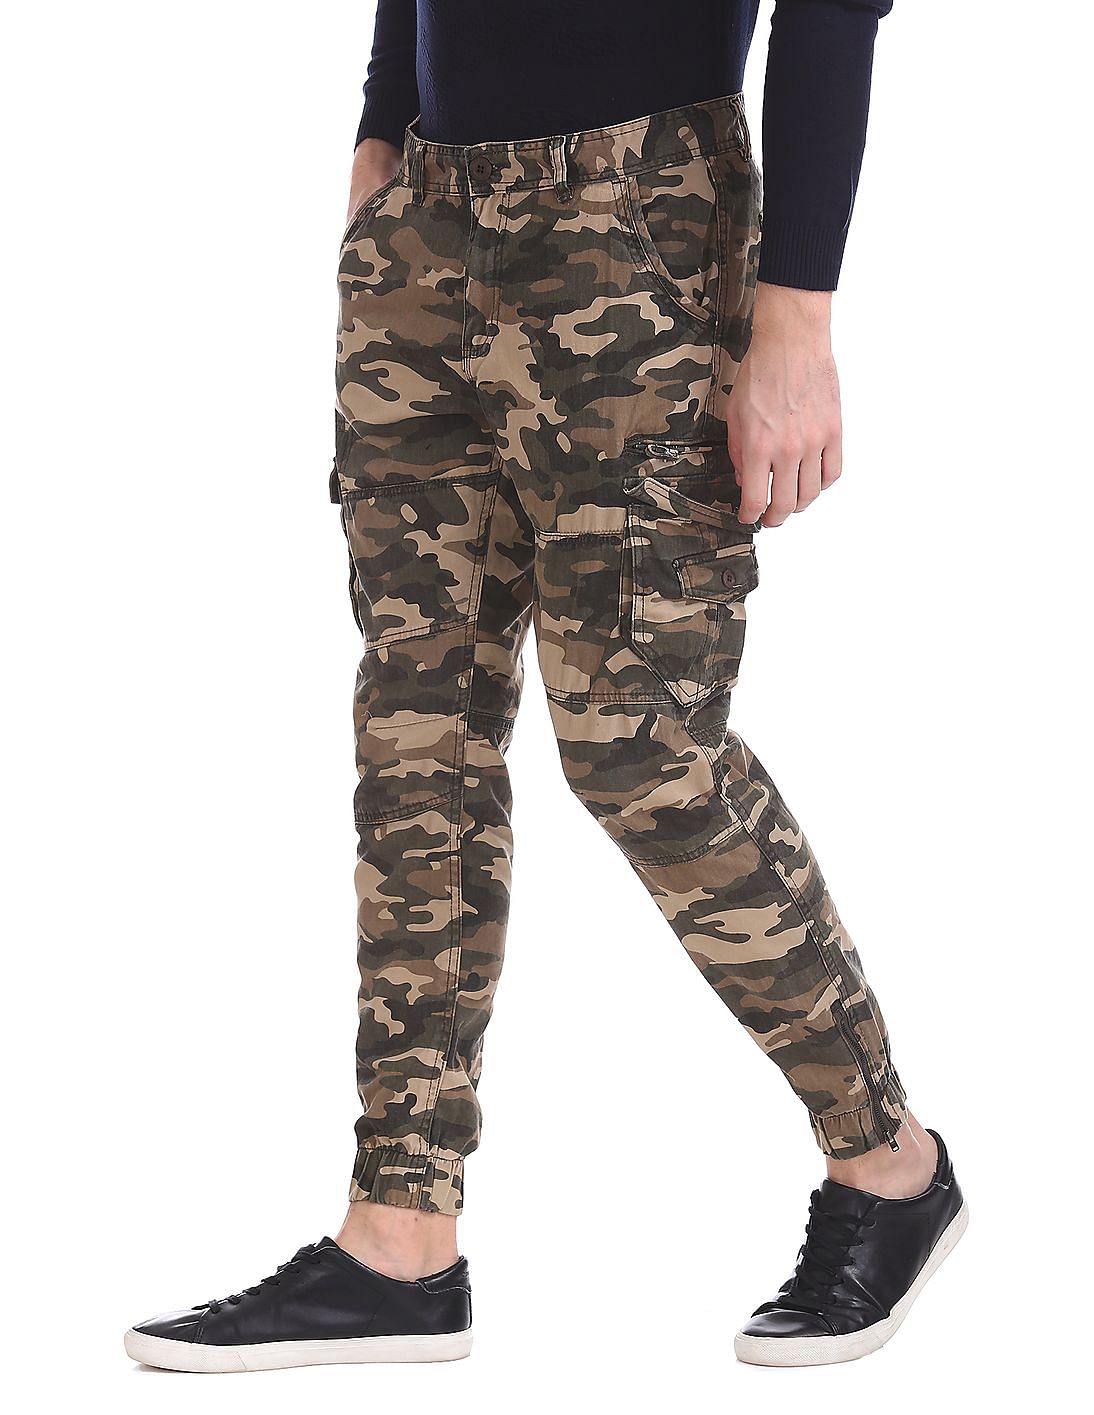 Site Harrier Camouflage Mens Multipocket trousers W34 L32  DIY at BQ